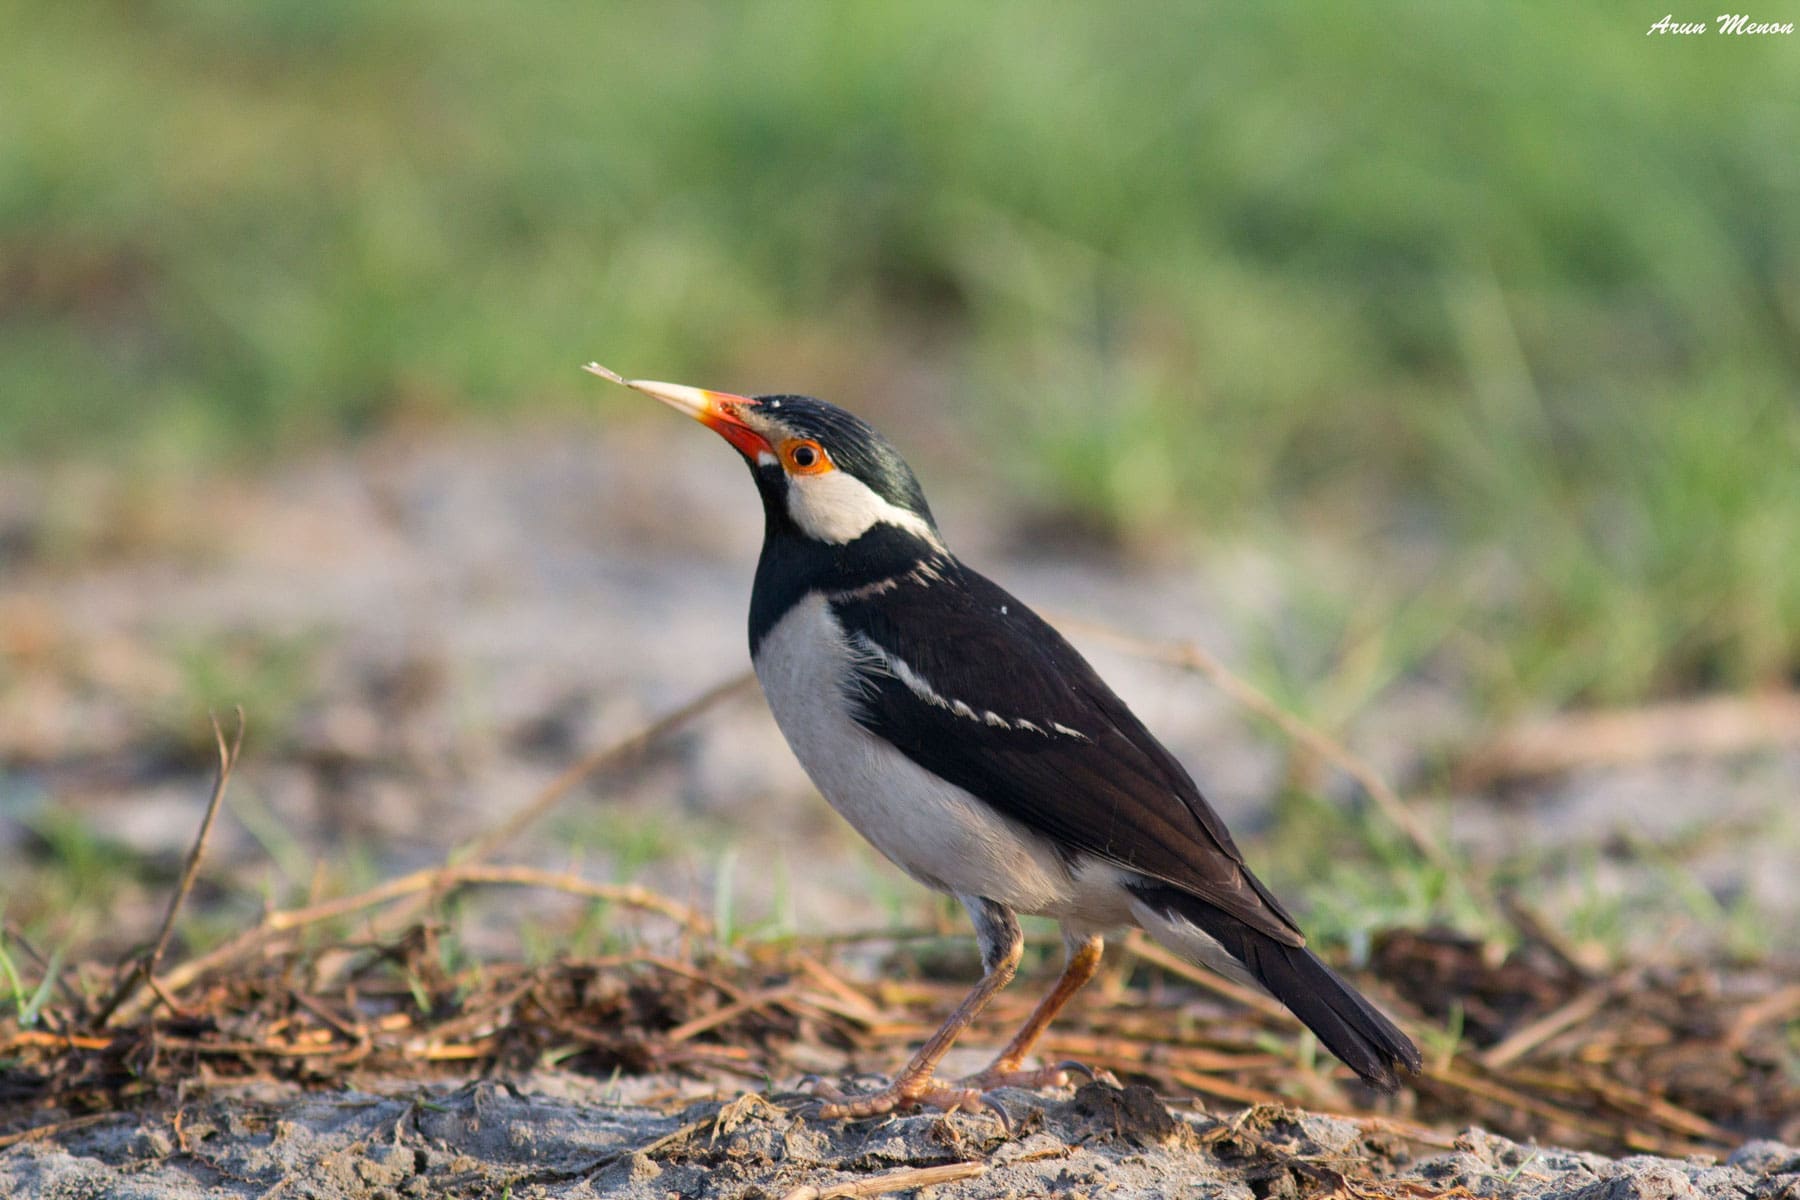 Indian Pied Starling or Pied Myna | The Green Ogre